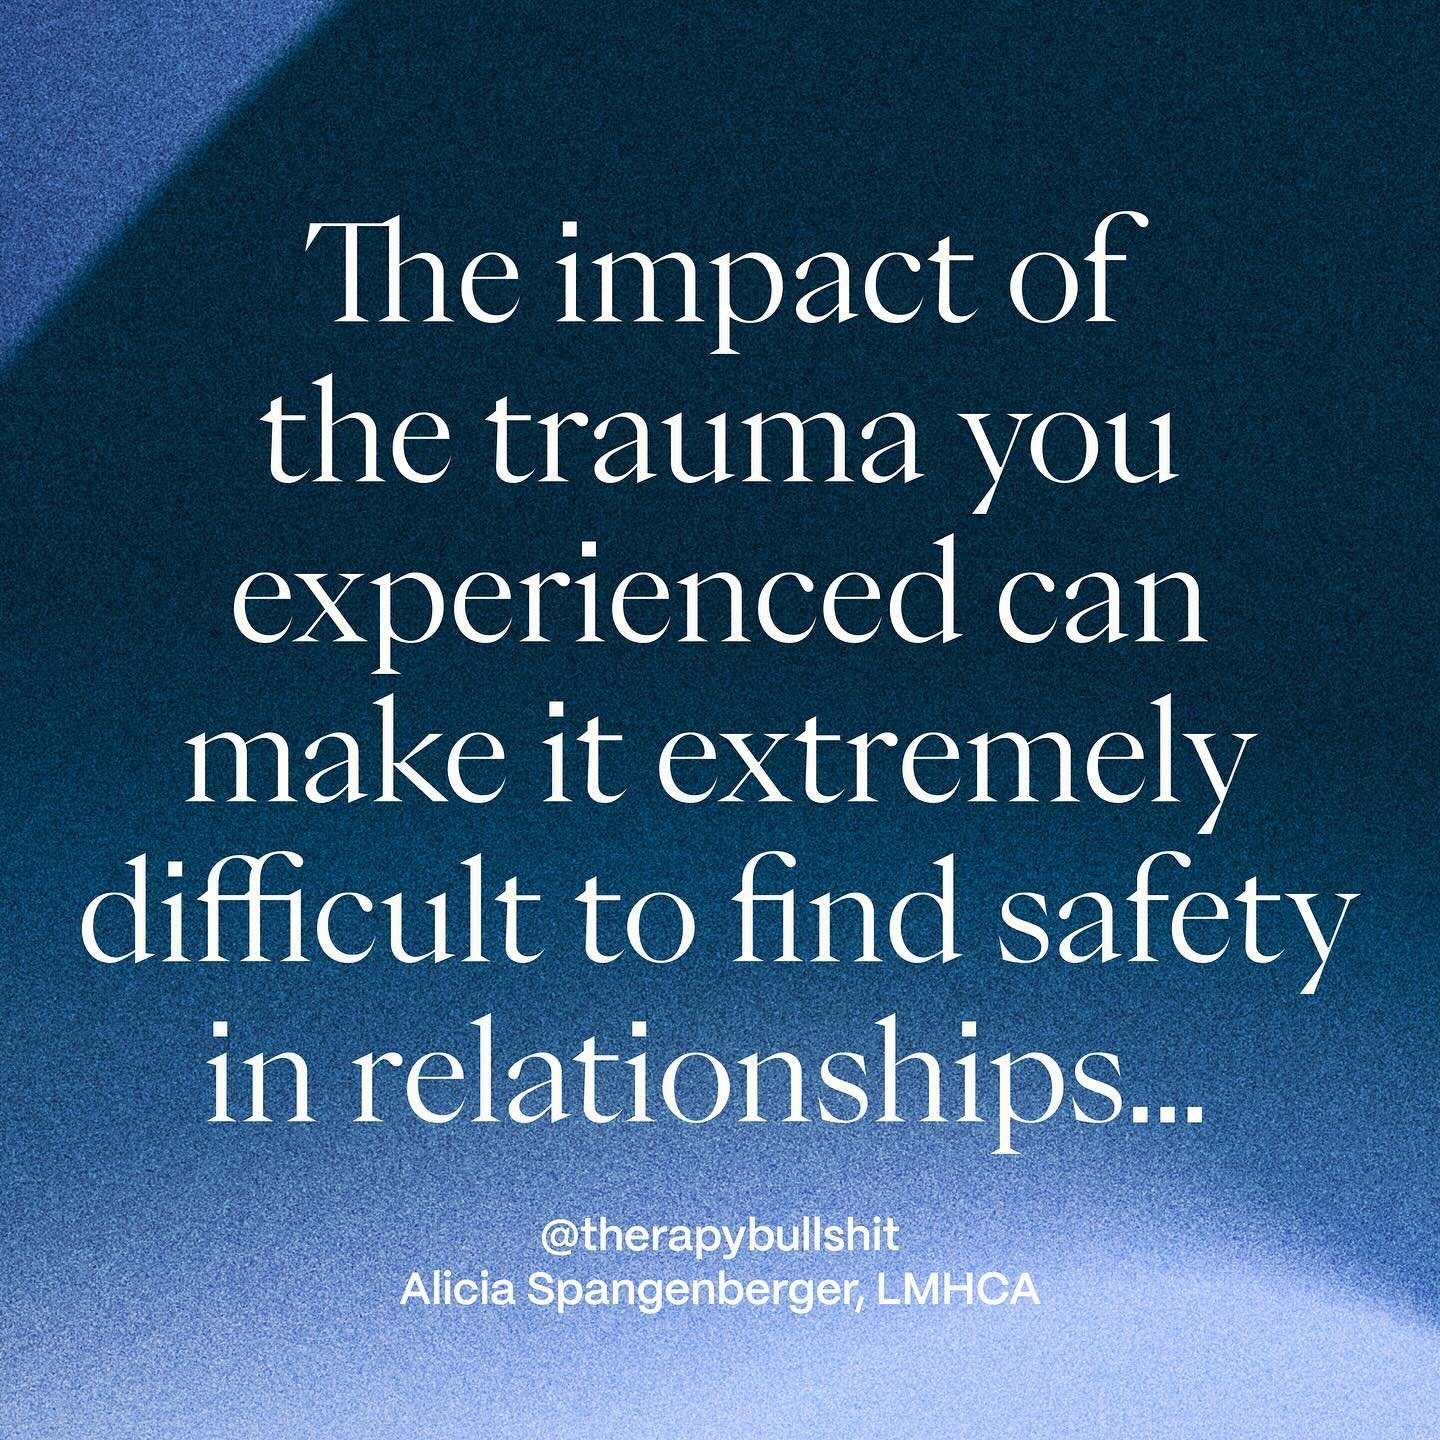 As a couples therapist, I can&rsquo;t promise you a &ldquo;perfect&rdquo; relationship. But what I can promise, is that you were not put on this Earth just to suffer through the impacts of the trauma you experienced.

I believe in your innate ability